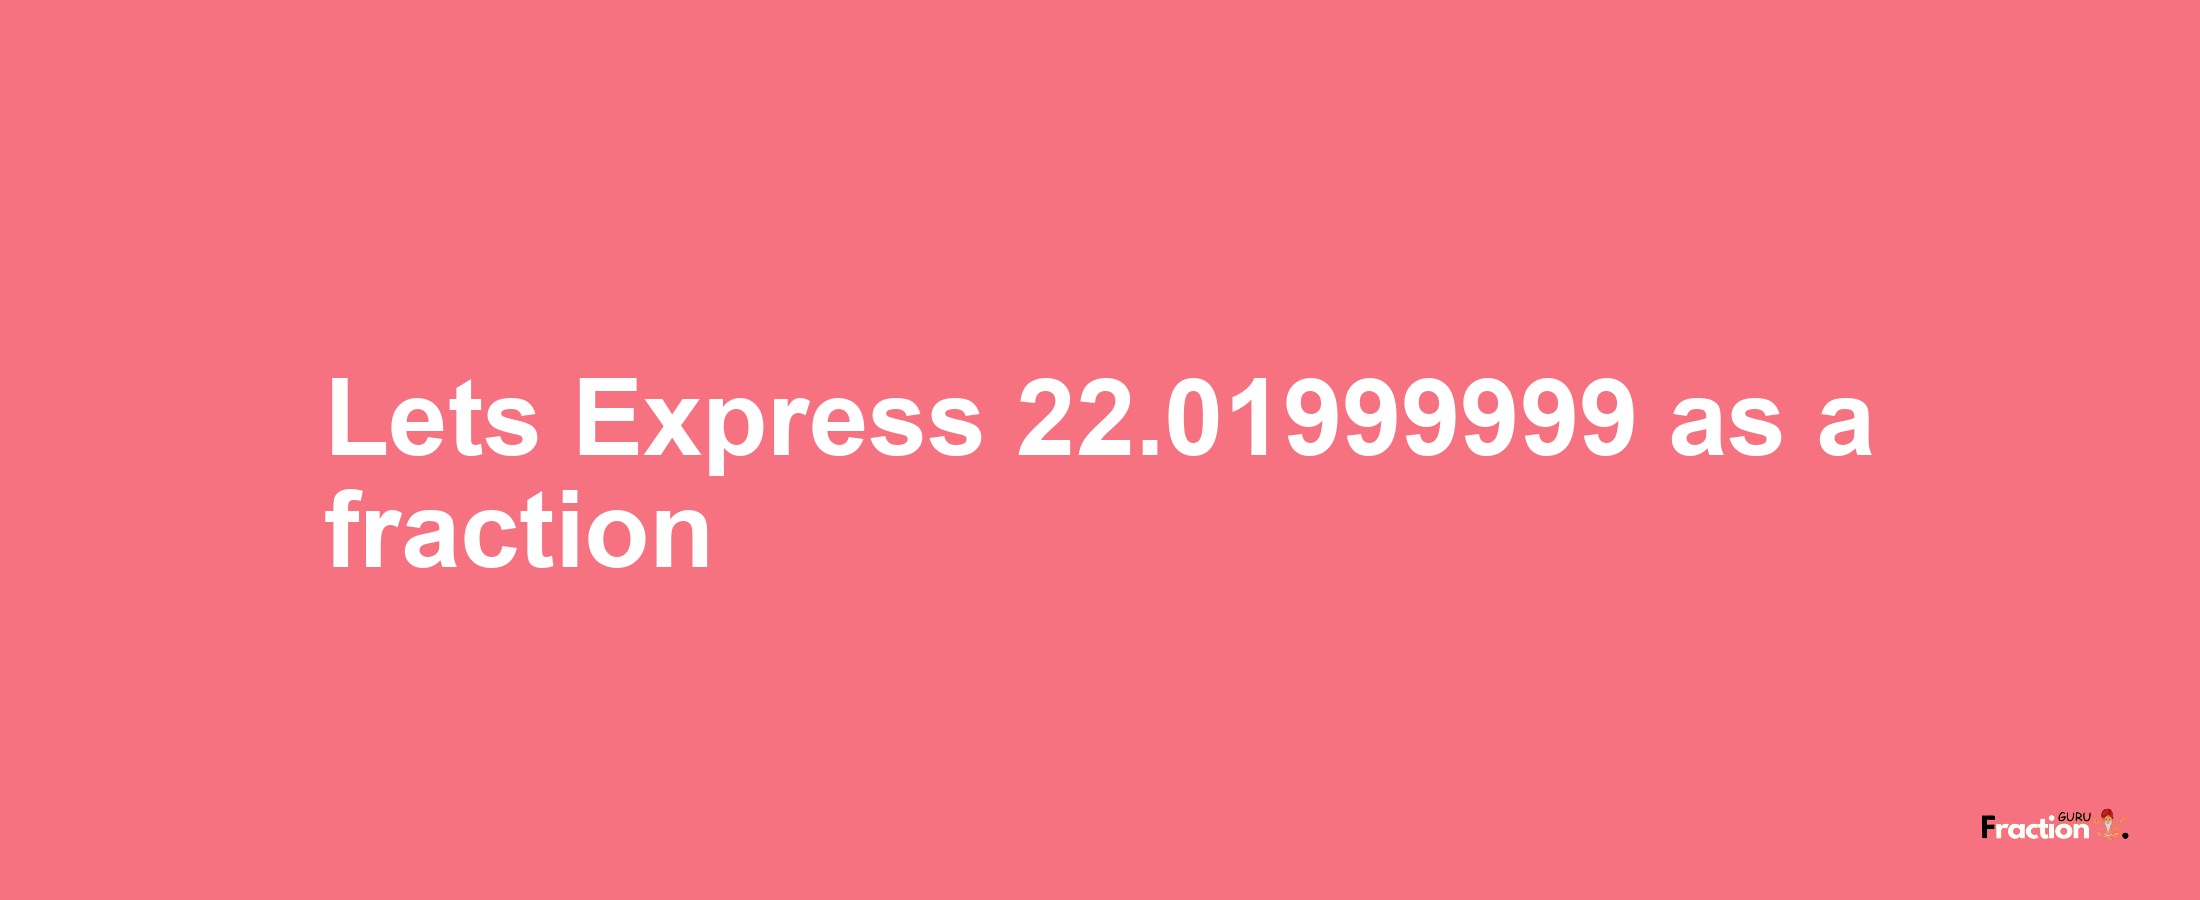 Lets Express 22.01999999 as afraction